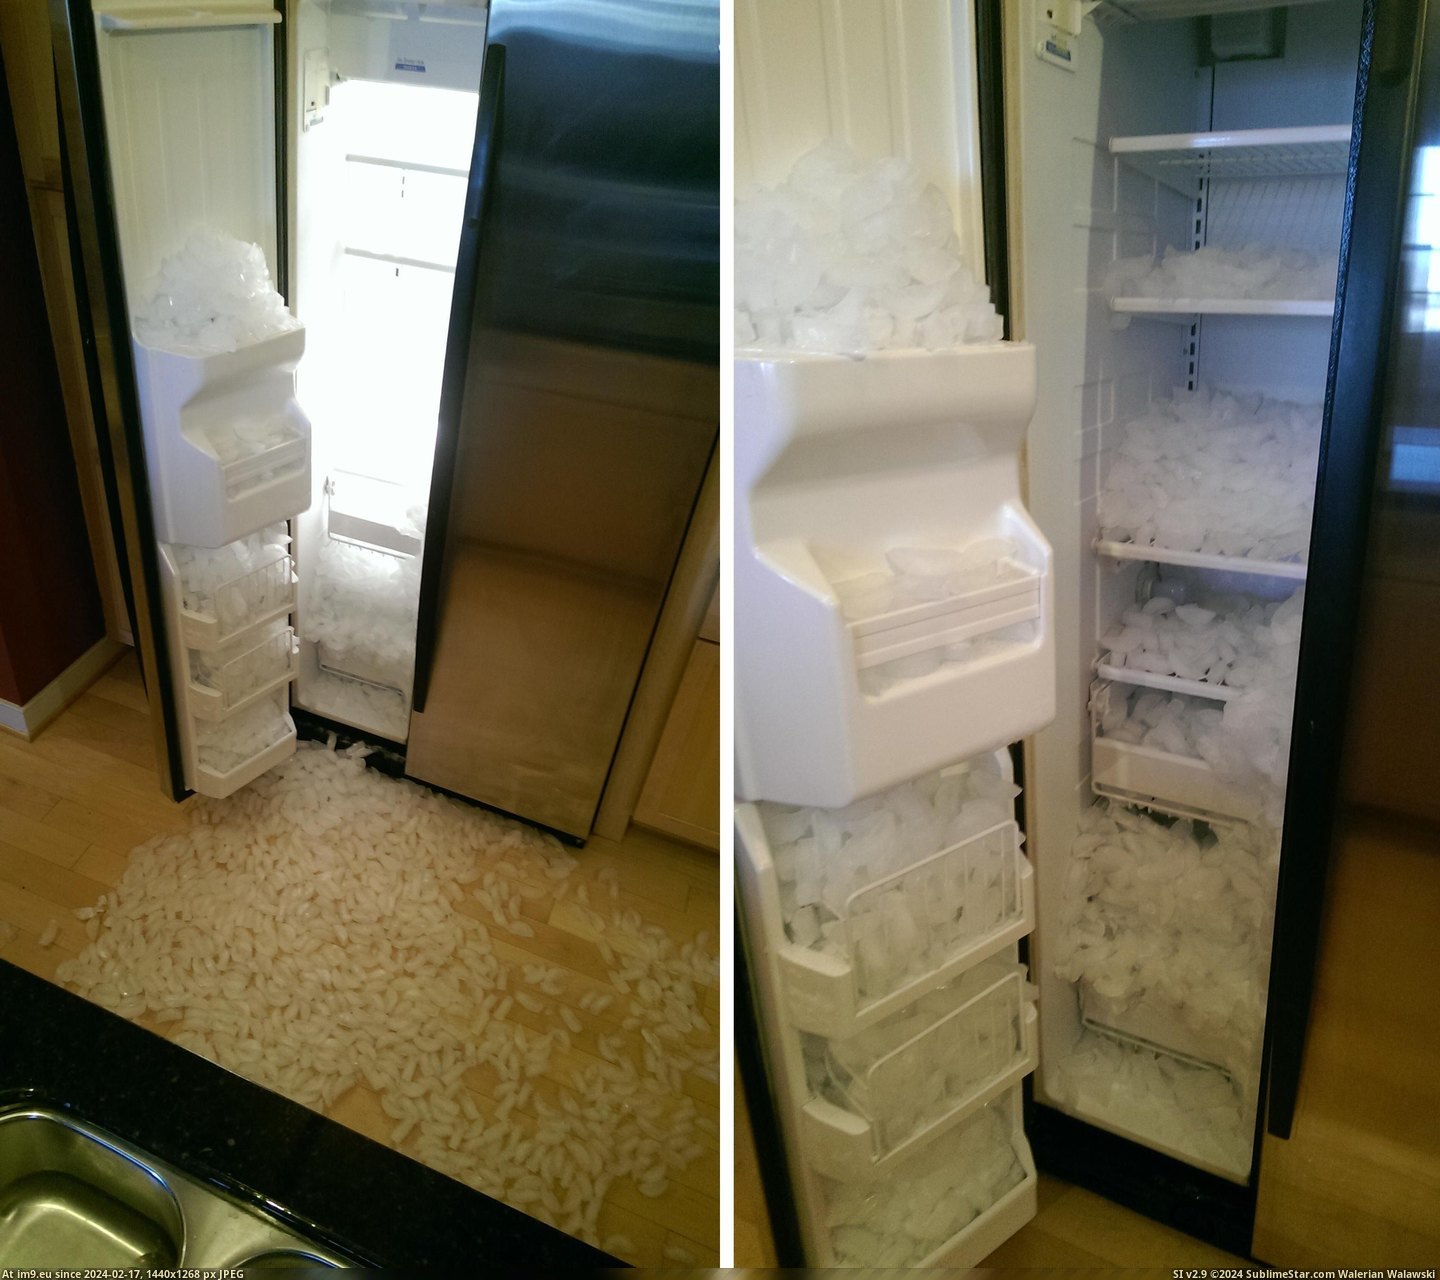 #Funny #Ice #Goin #Works #Maker [Funny] My ice maker works. So I got that goin for me which is ice Pic. (Изображение из альбом My r/FUNNY favs))